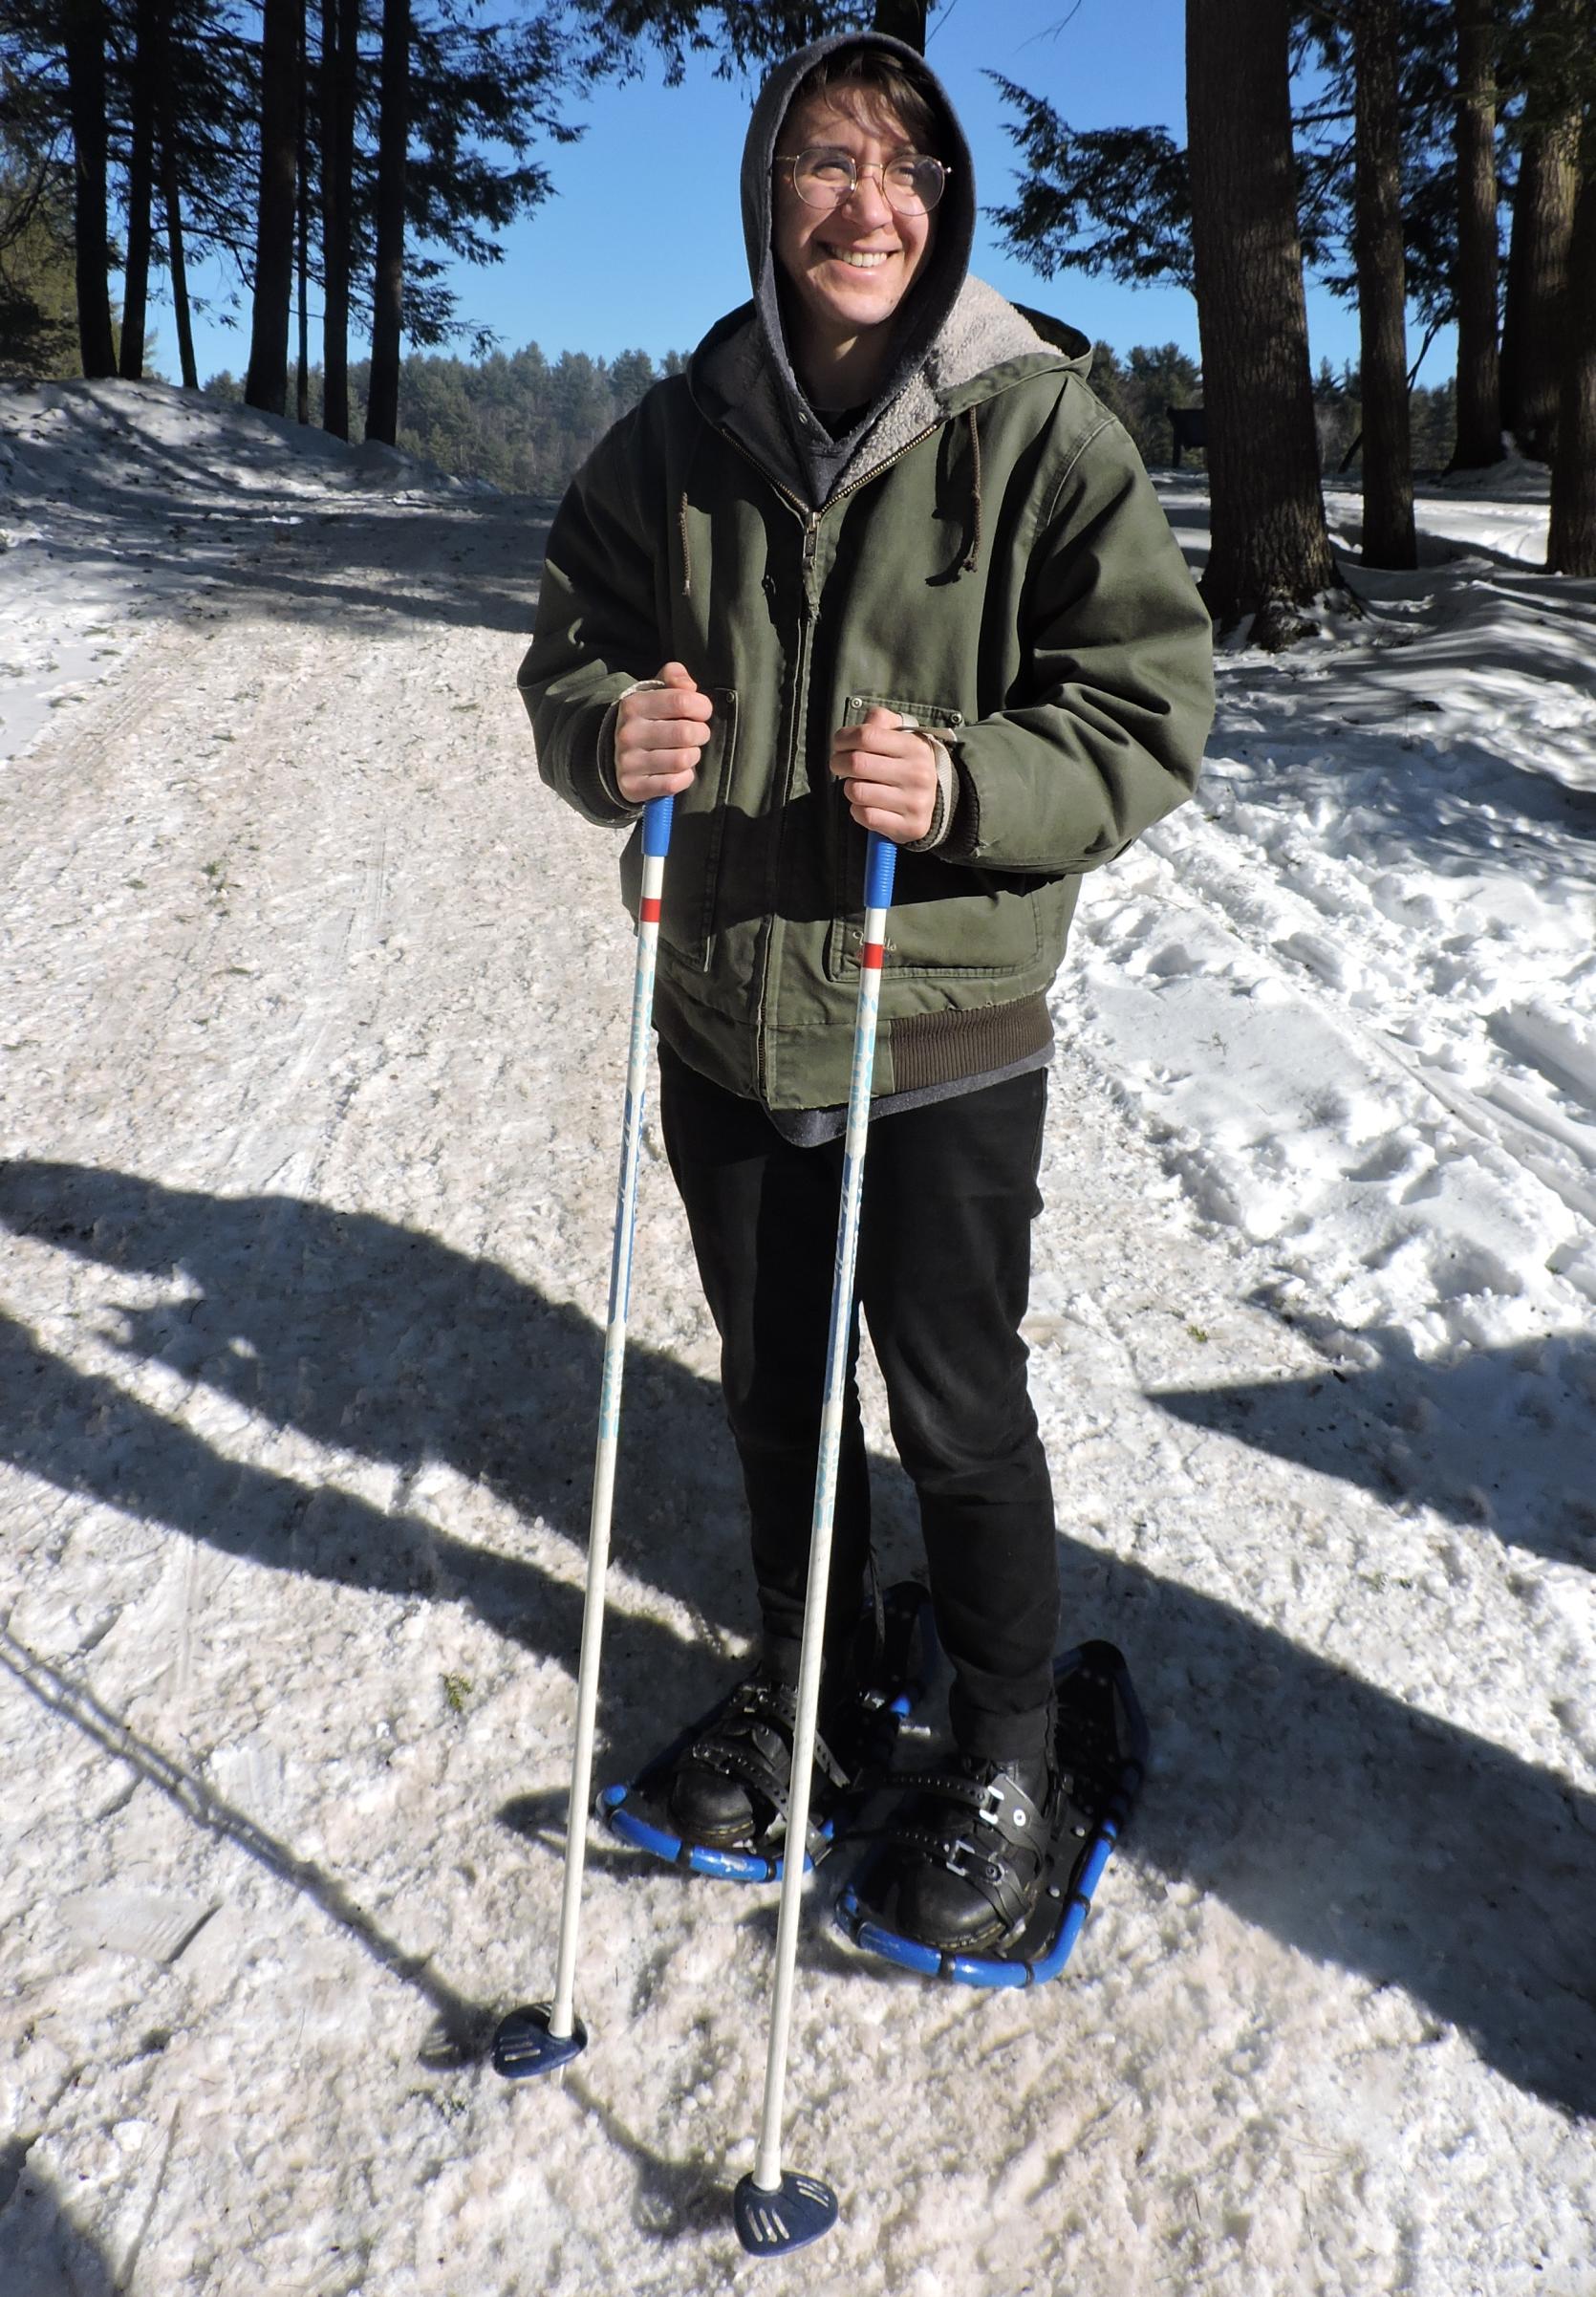 A person wearing snowshoes and holding ski poles is standing at the foot of a snowy trail smiling at the camera.